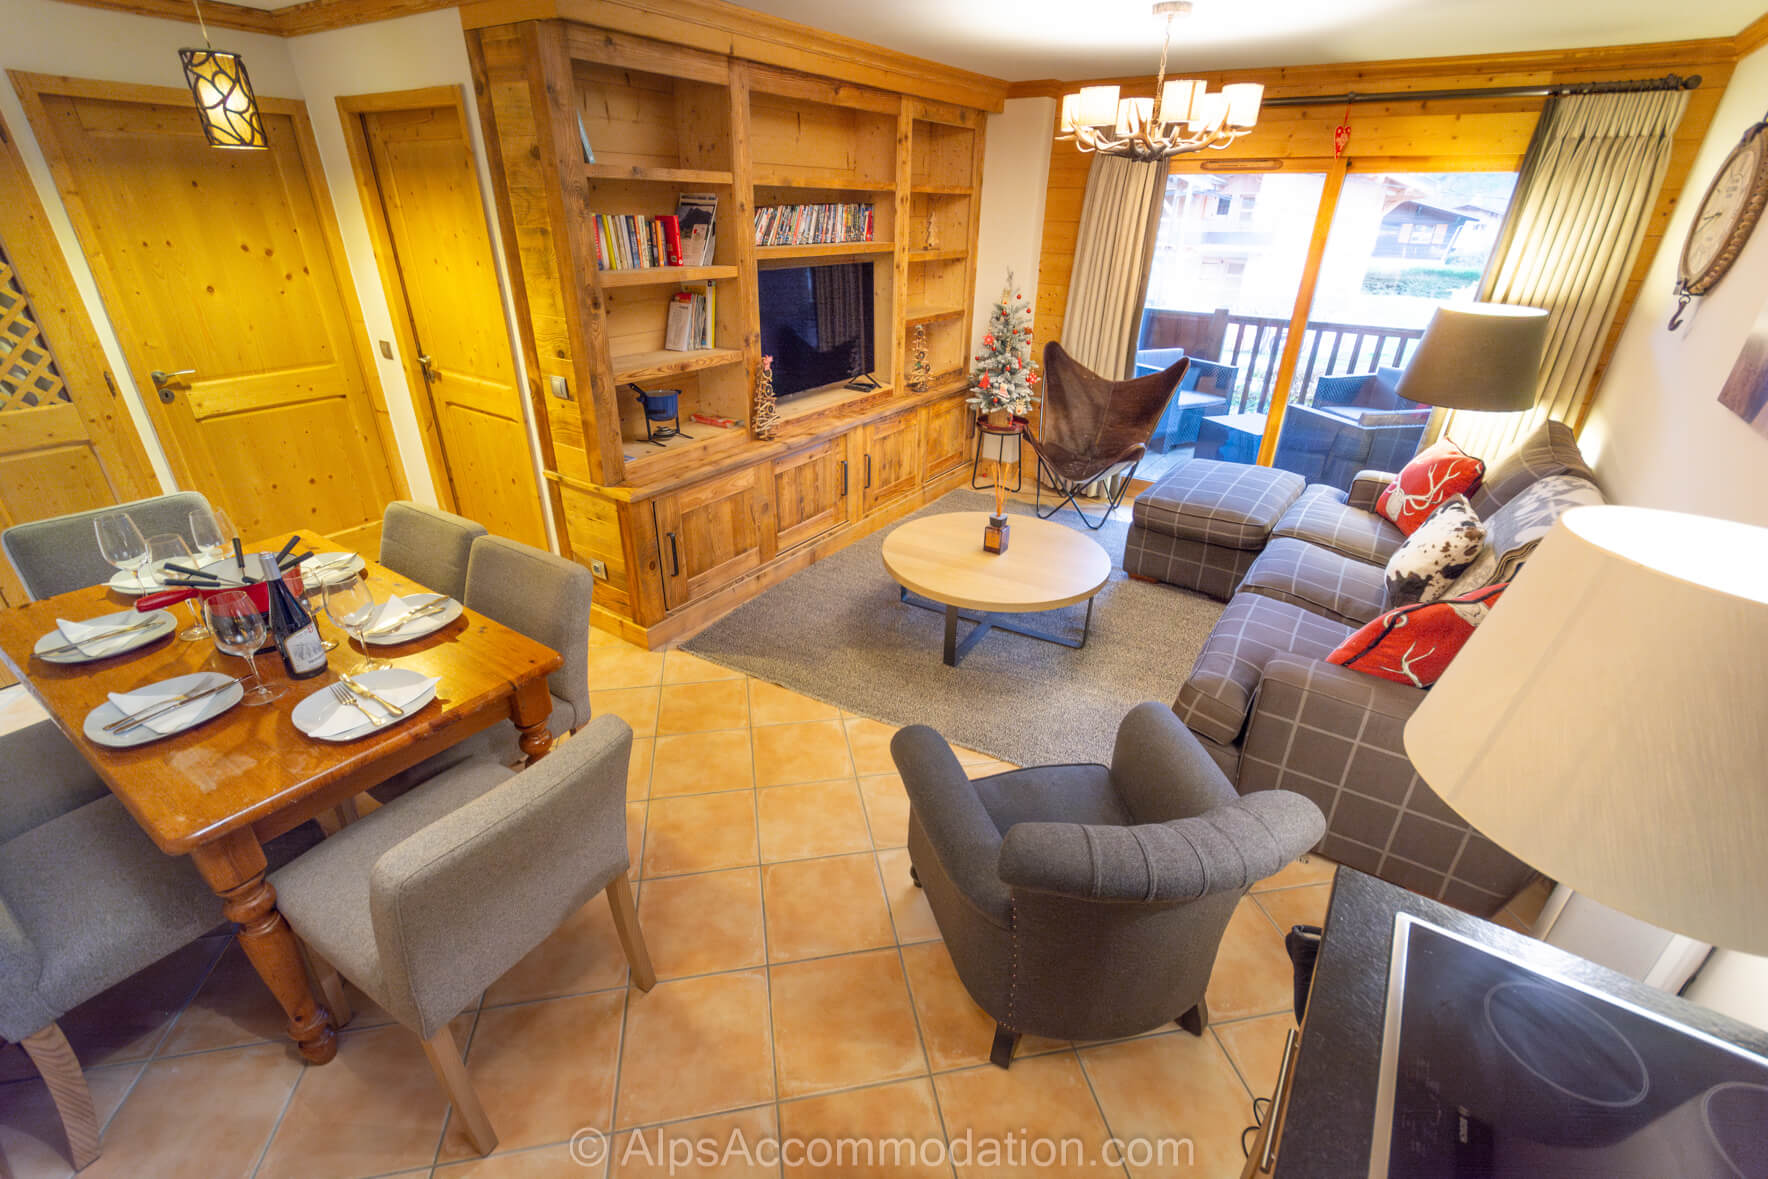 Chardons Argentes G6 Samoëns - A wonderfully convivial area to share with family or friends